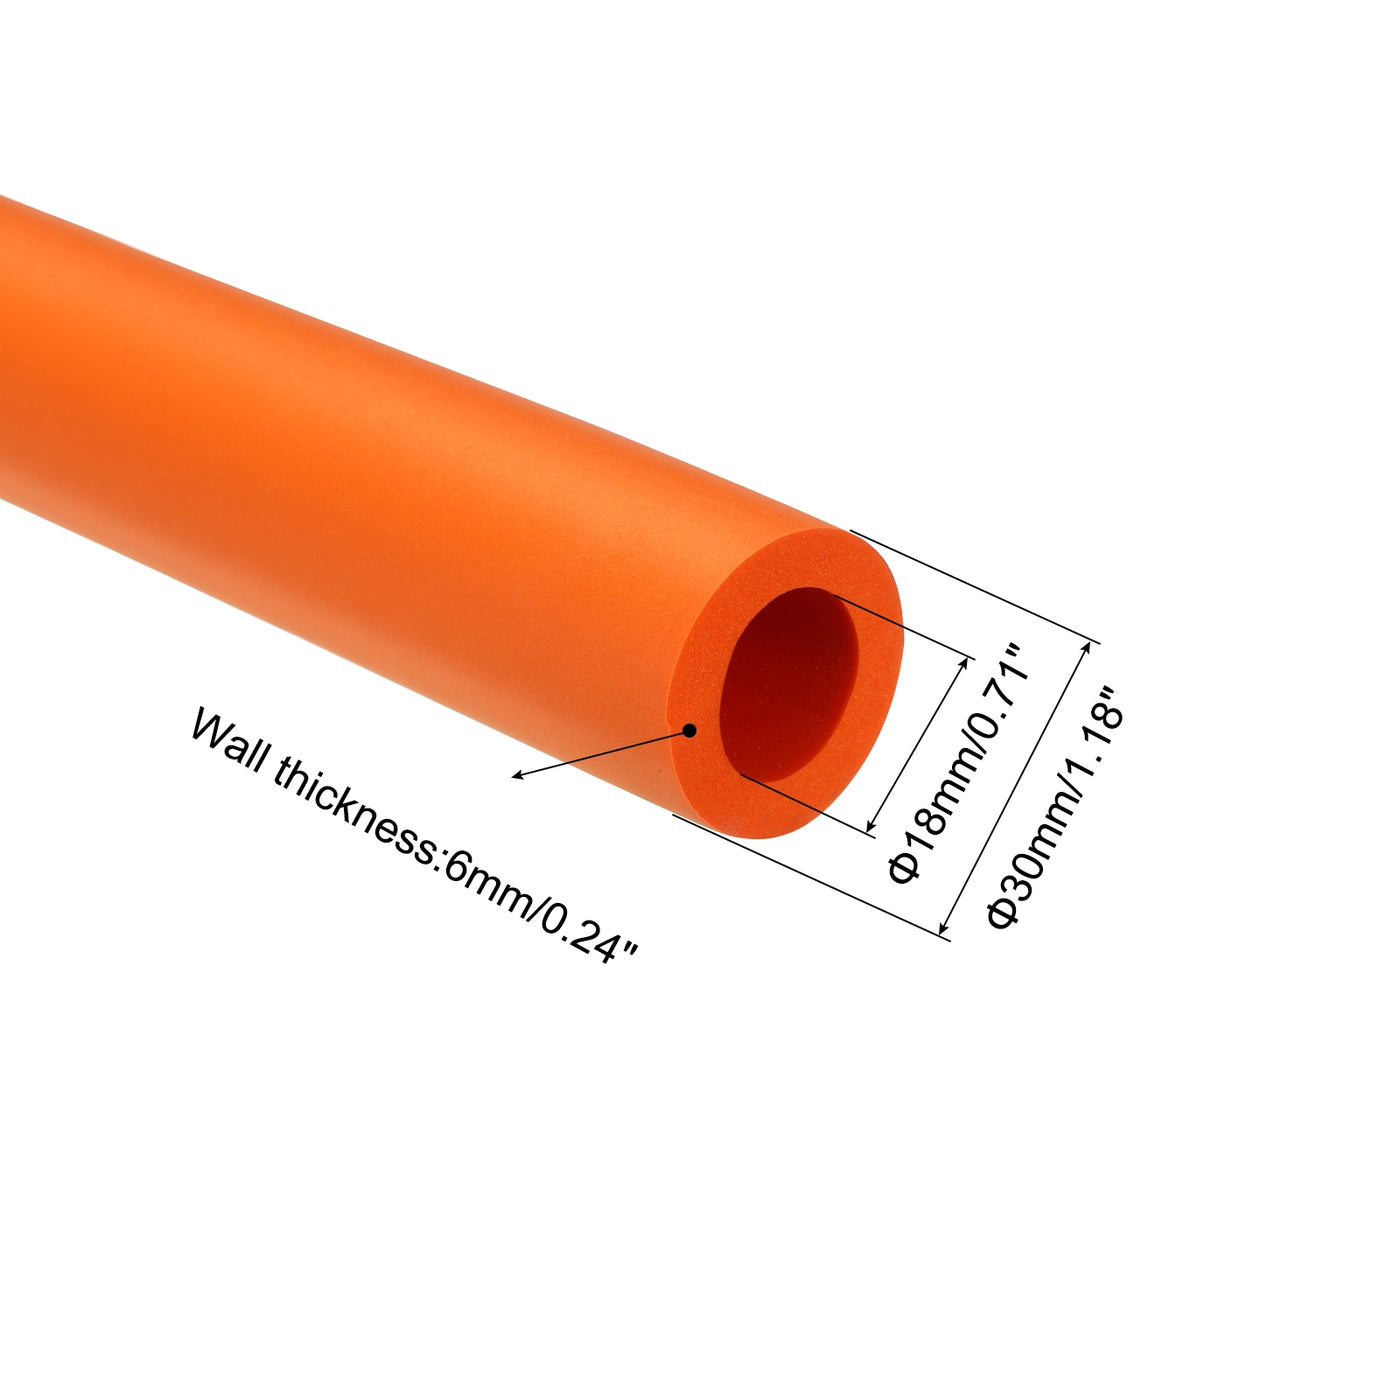 uxcell Uxcell 2pcs 3.3ft Pipe Insulation Tube 18mm ID 30mm OD Foam Tubing for Handle Grip Support, Orange